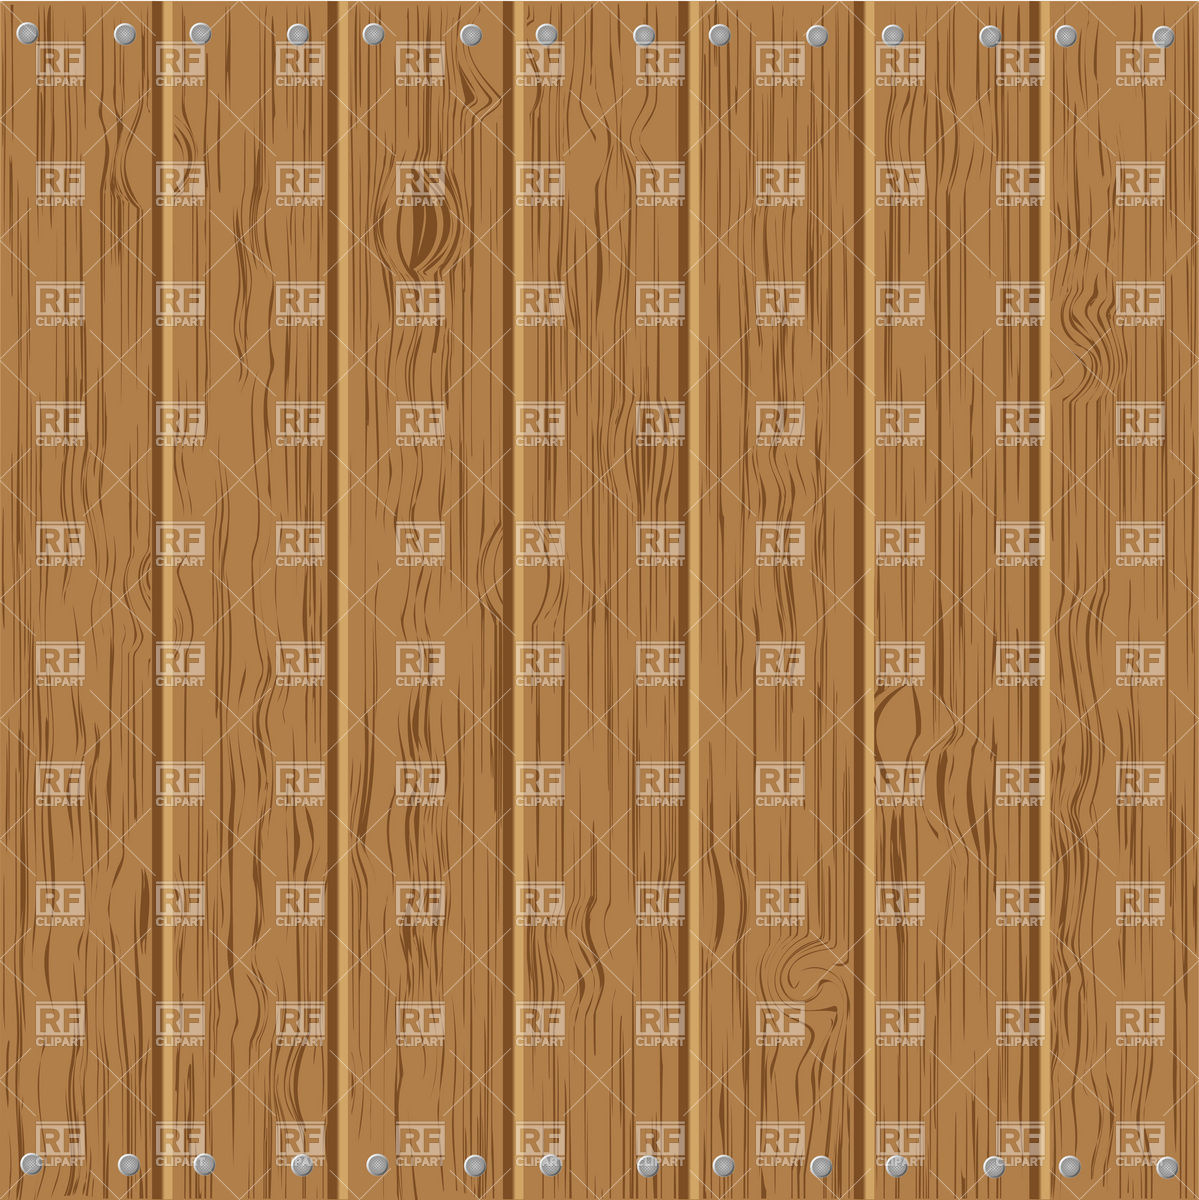 Wooden Texture Of Planks Backgrounds Textures Abstract Download    